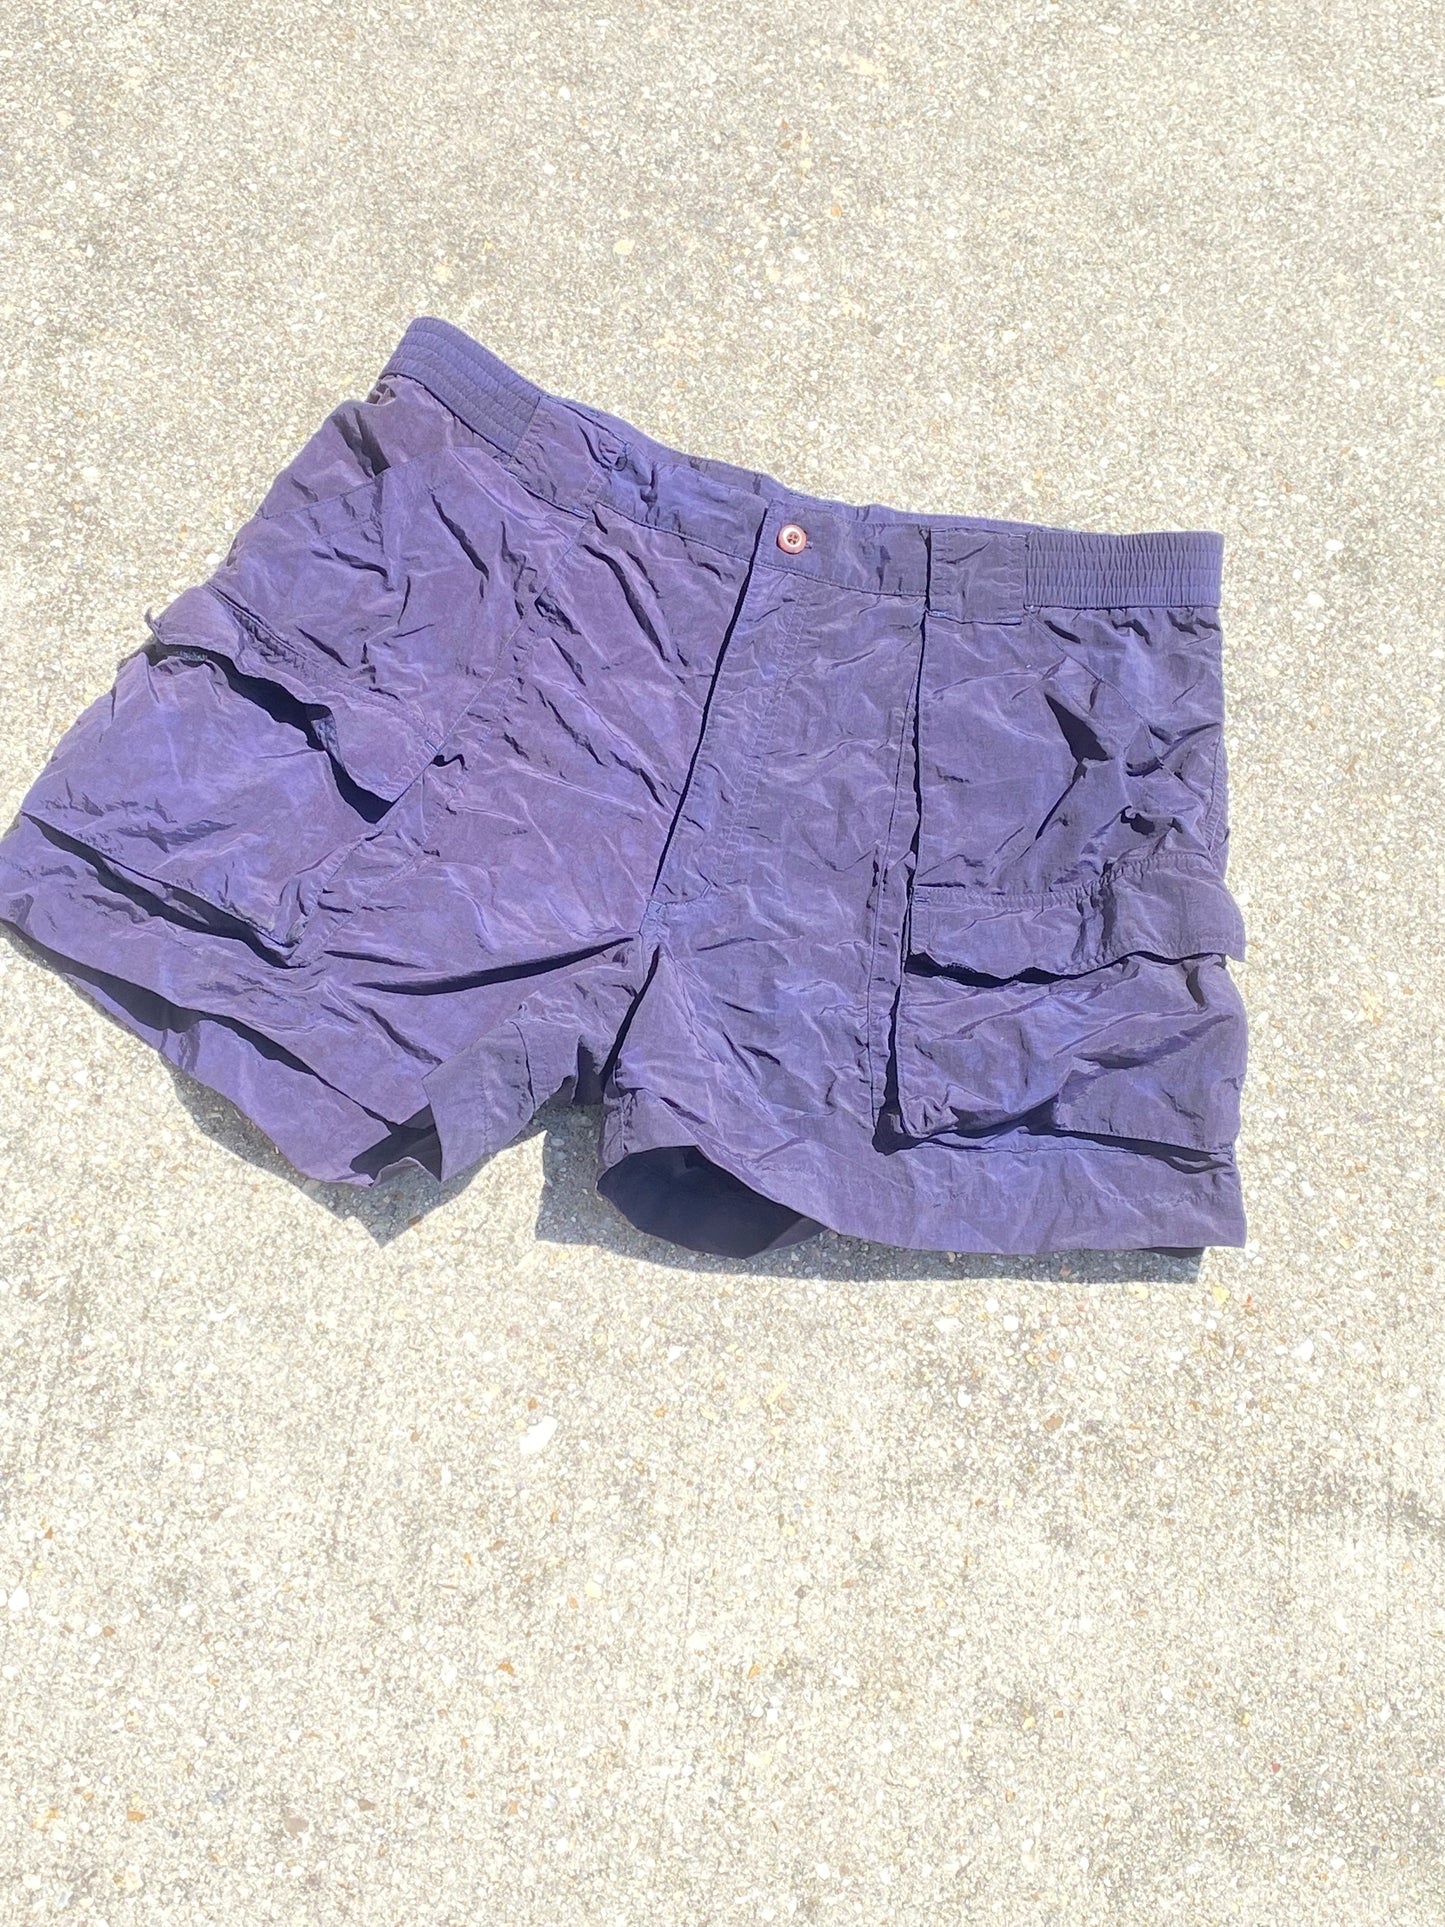 EMS Handyed Dyed Mountaineering Shorts - Brimm Archive Wardrobe Research